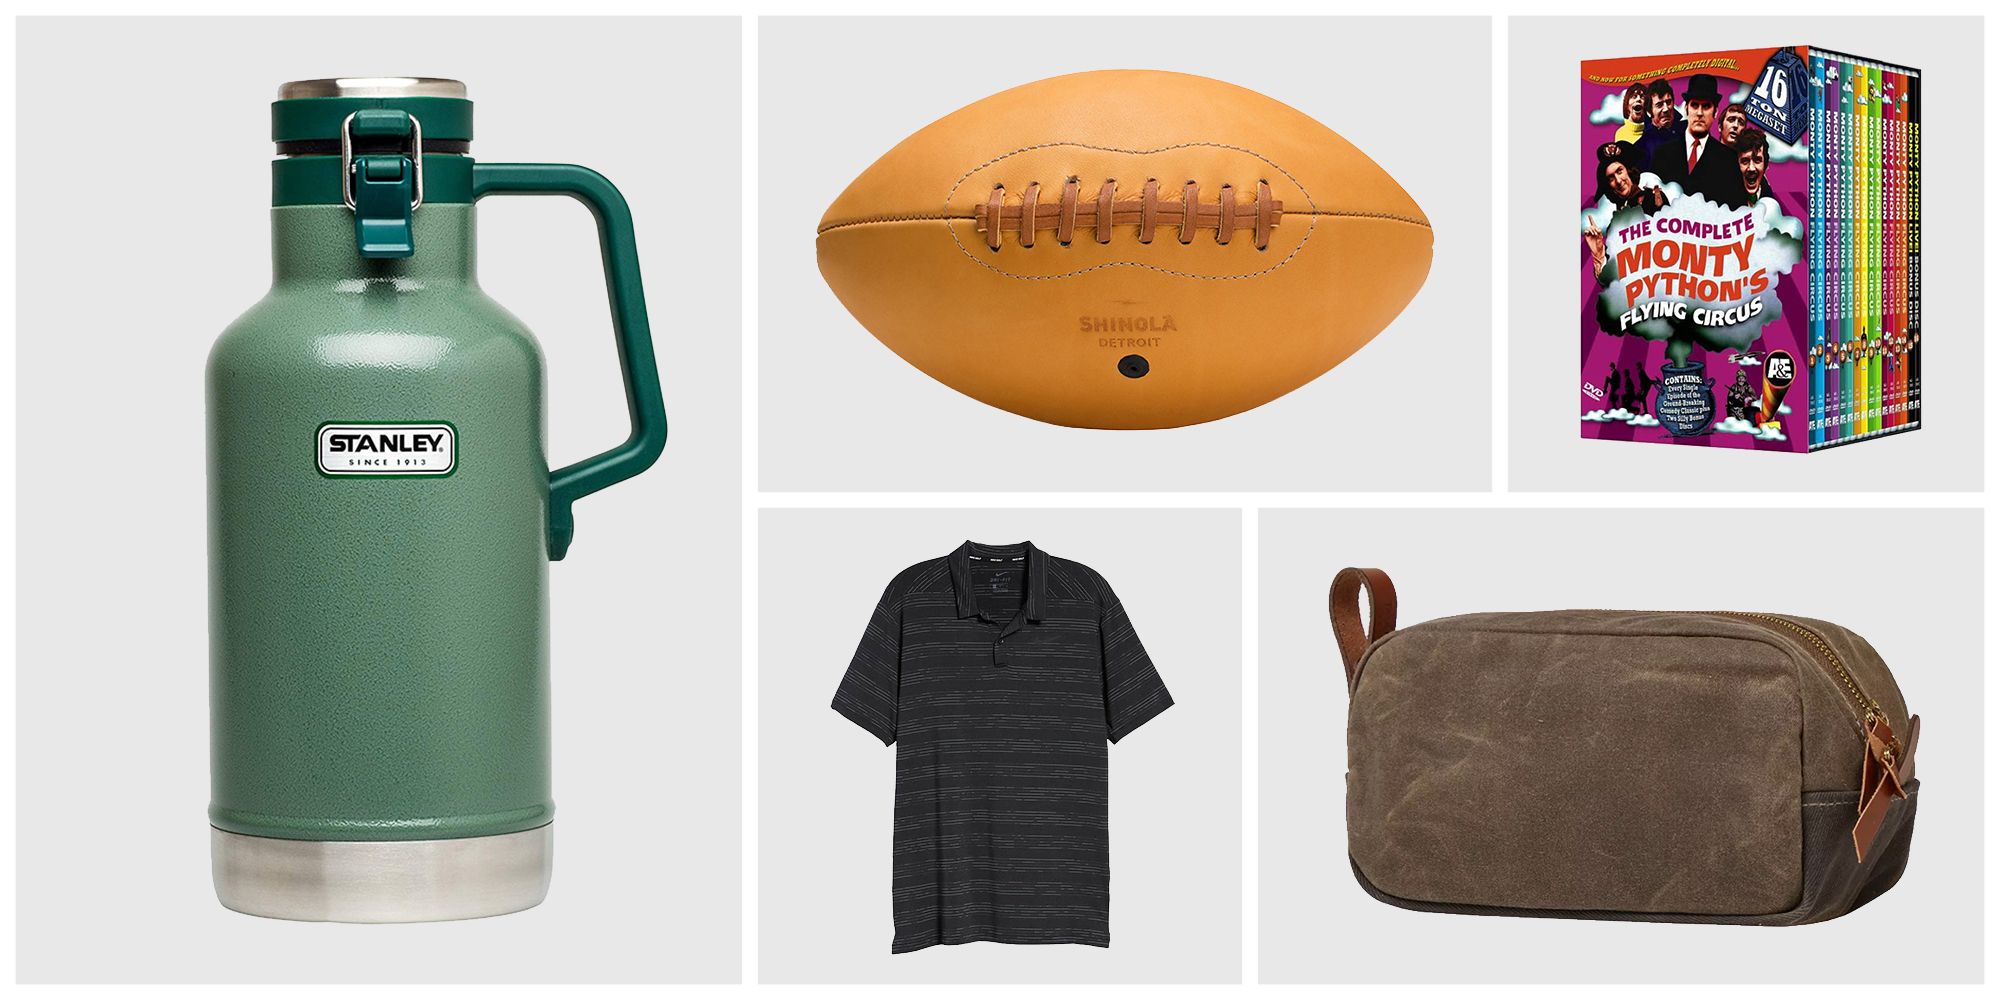 rugby gifts for dad